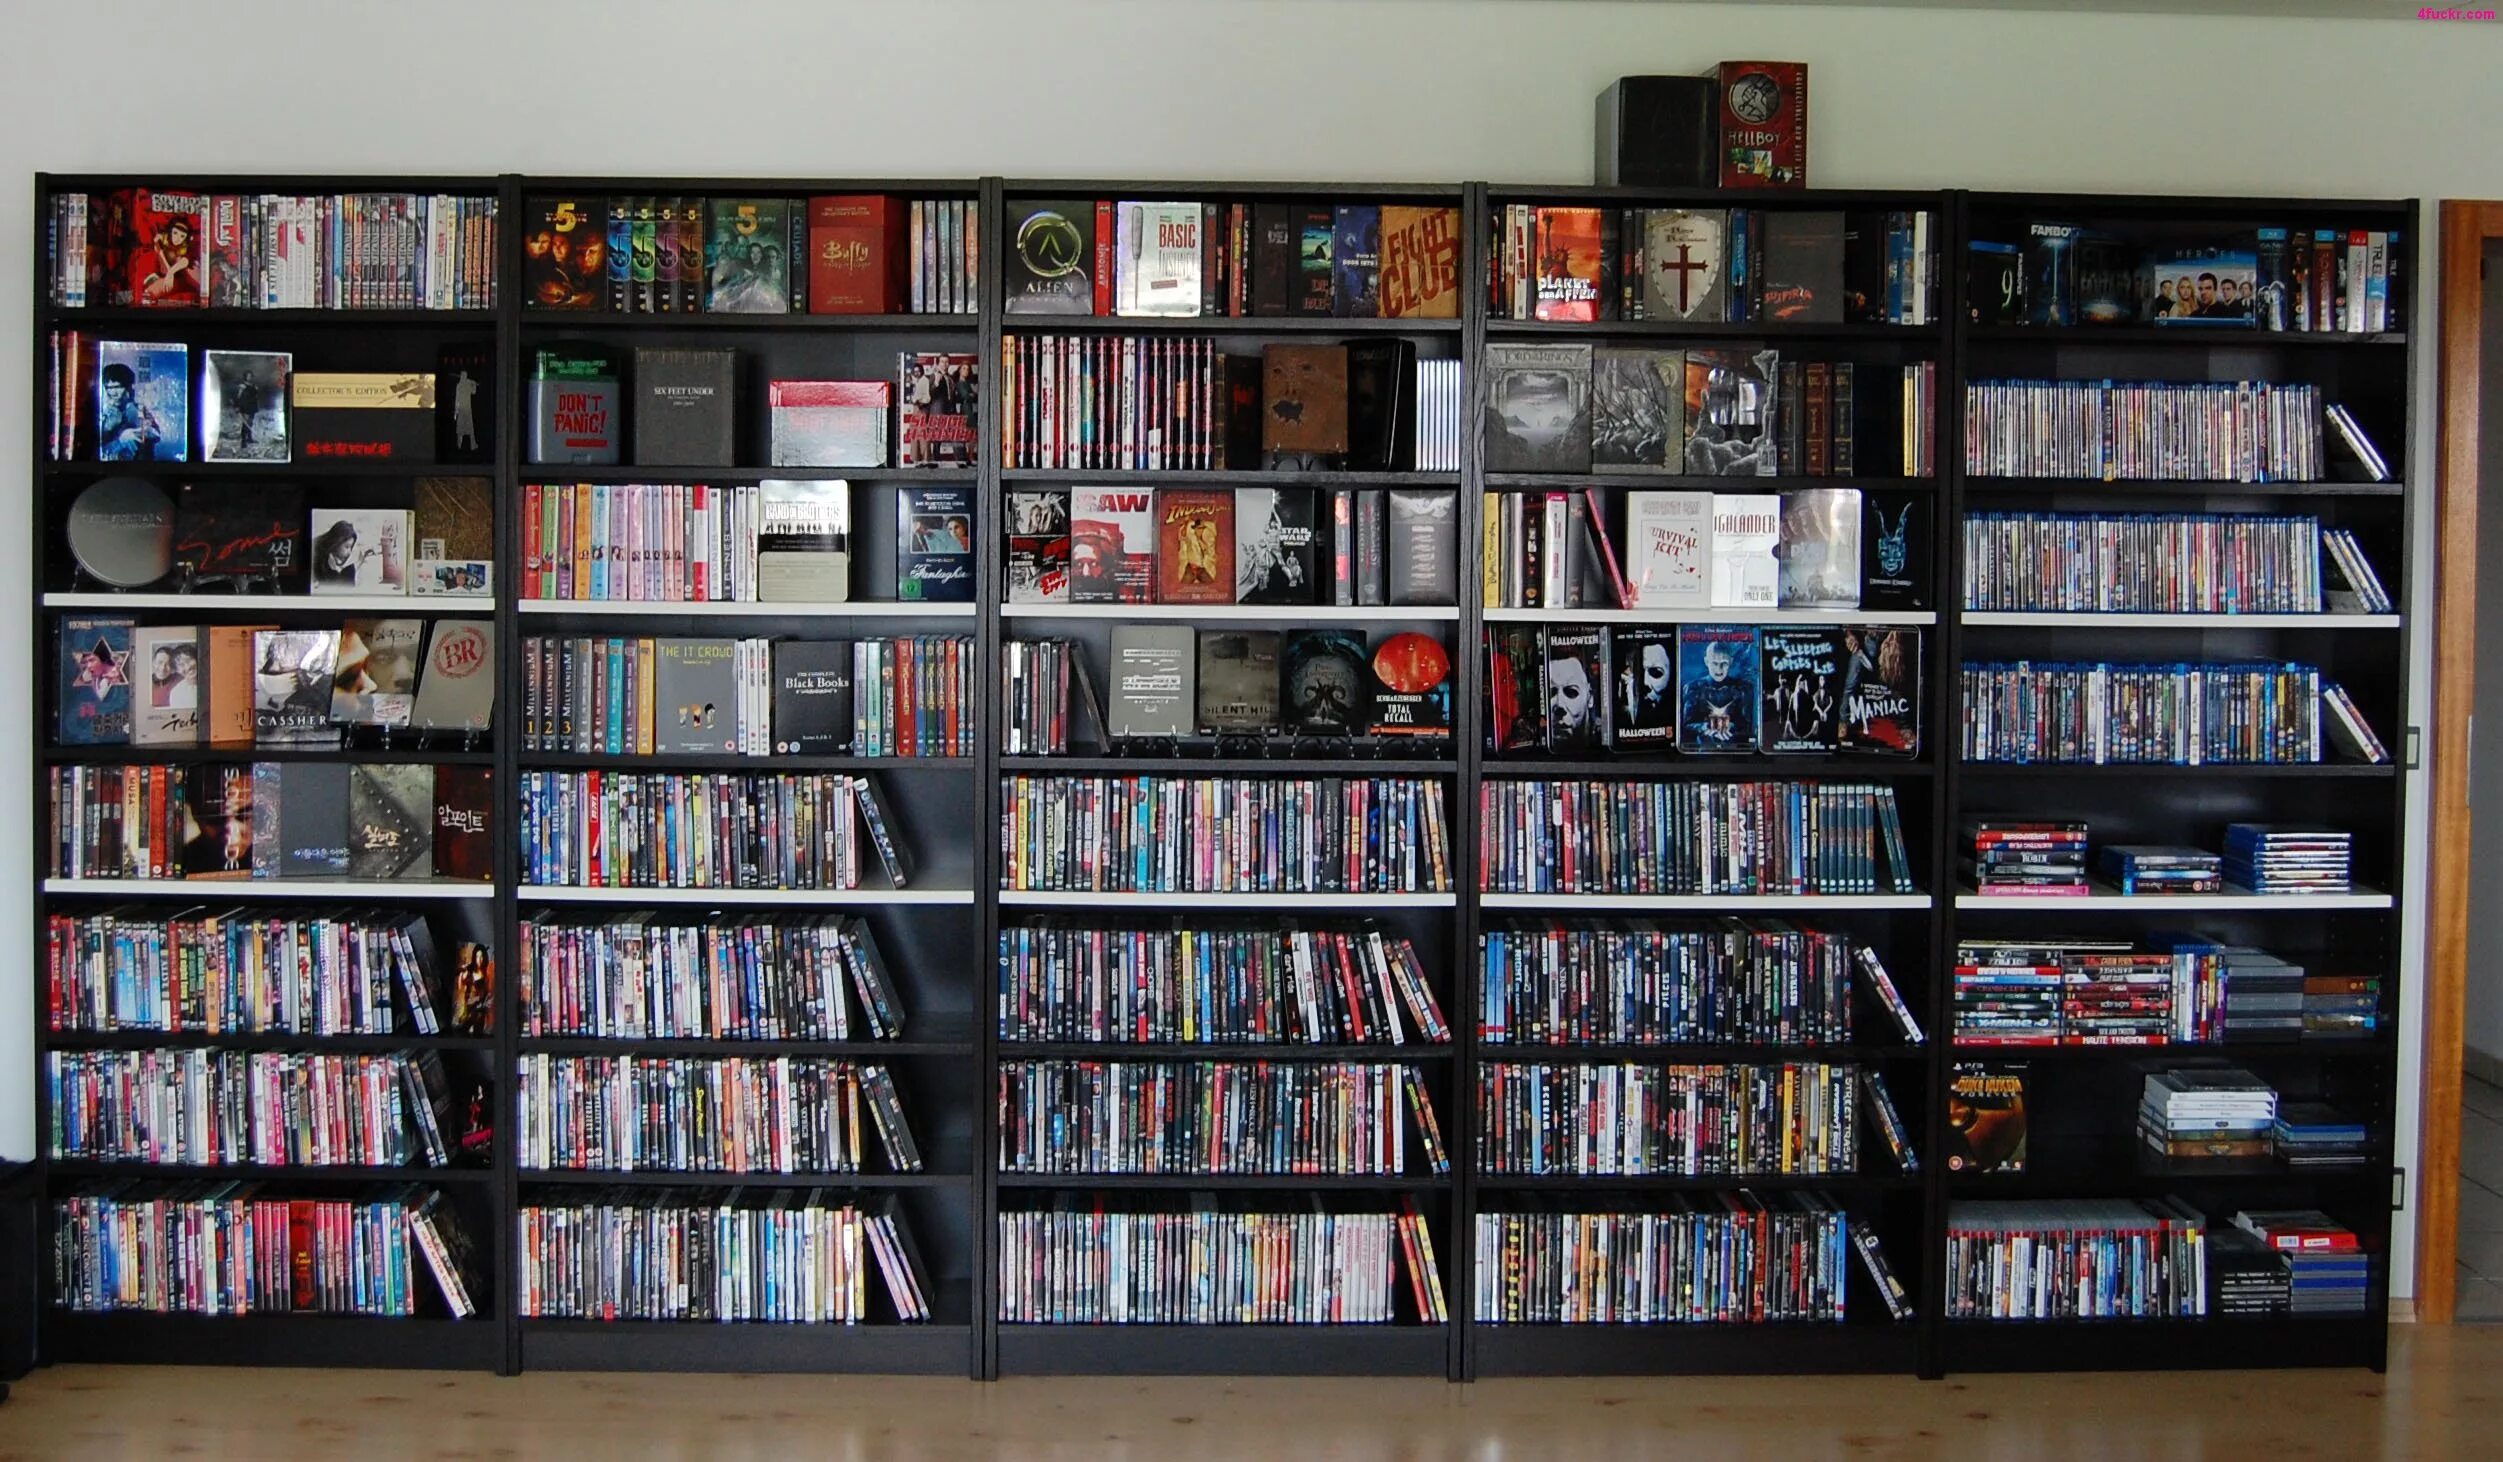 Movie collection Library. The rare movie collection. Pahtoon movie collection. Wiki collection